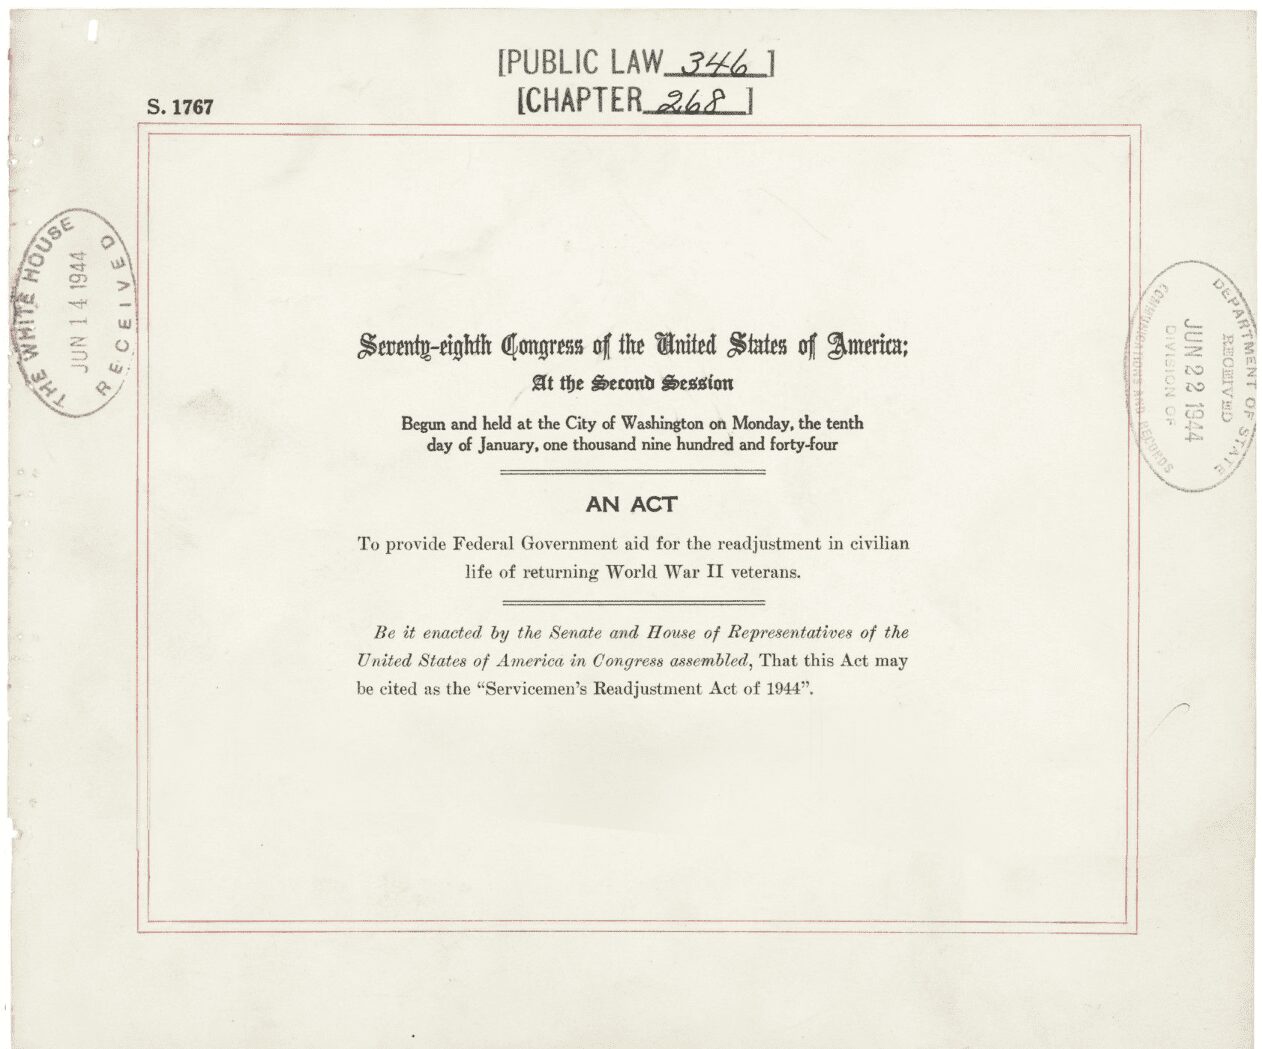 Servicemen’s Readjustment Act: An act to provide Federal Government aid for the readjustment in civilian life of returning World War II veterans, June 22,1944. (Credit: Public Domain)